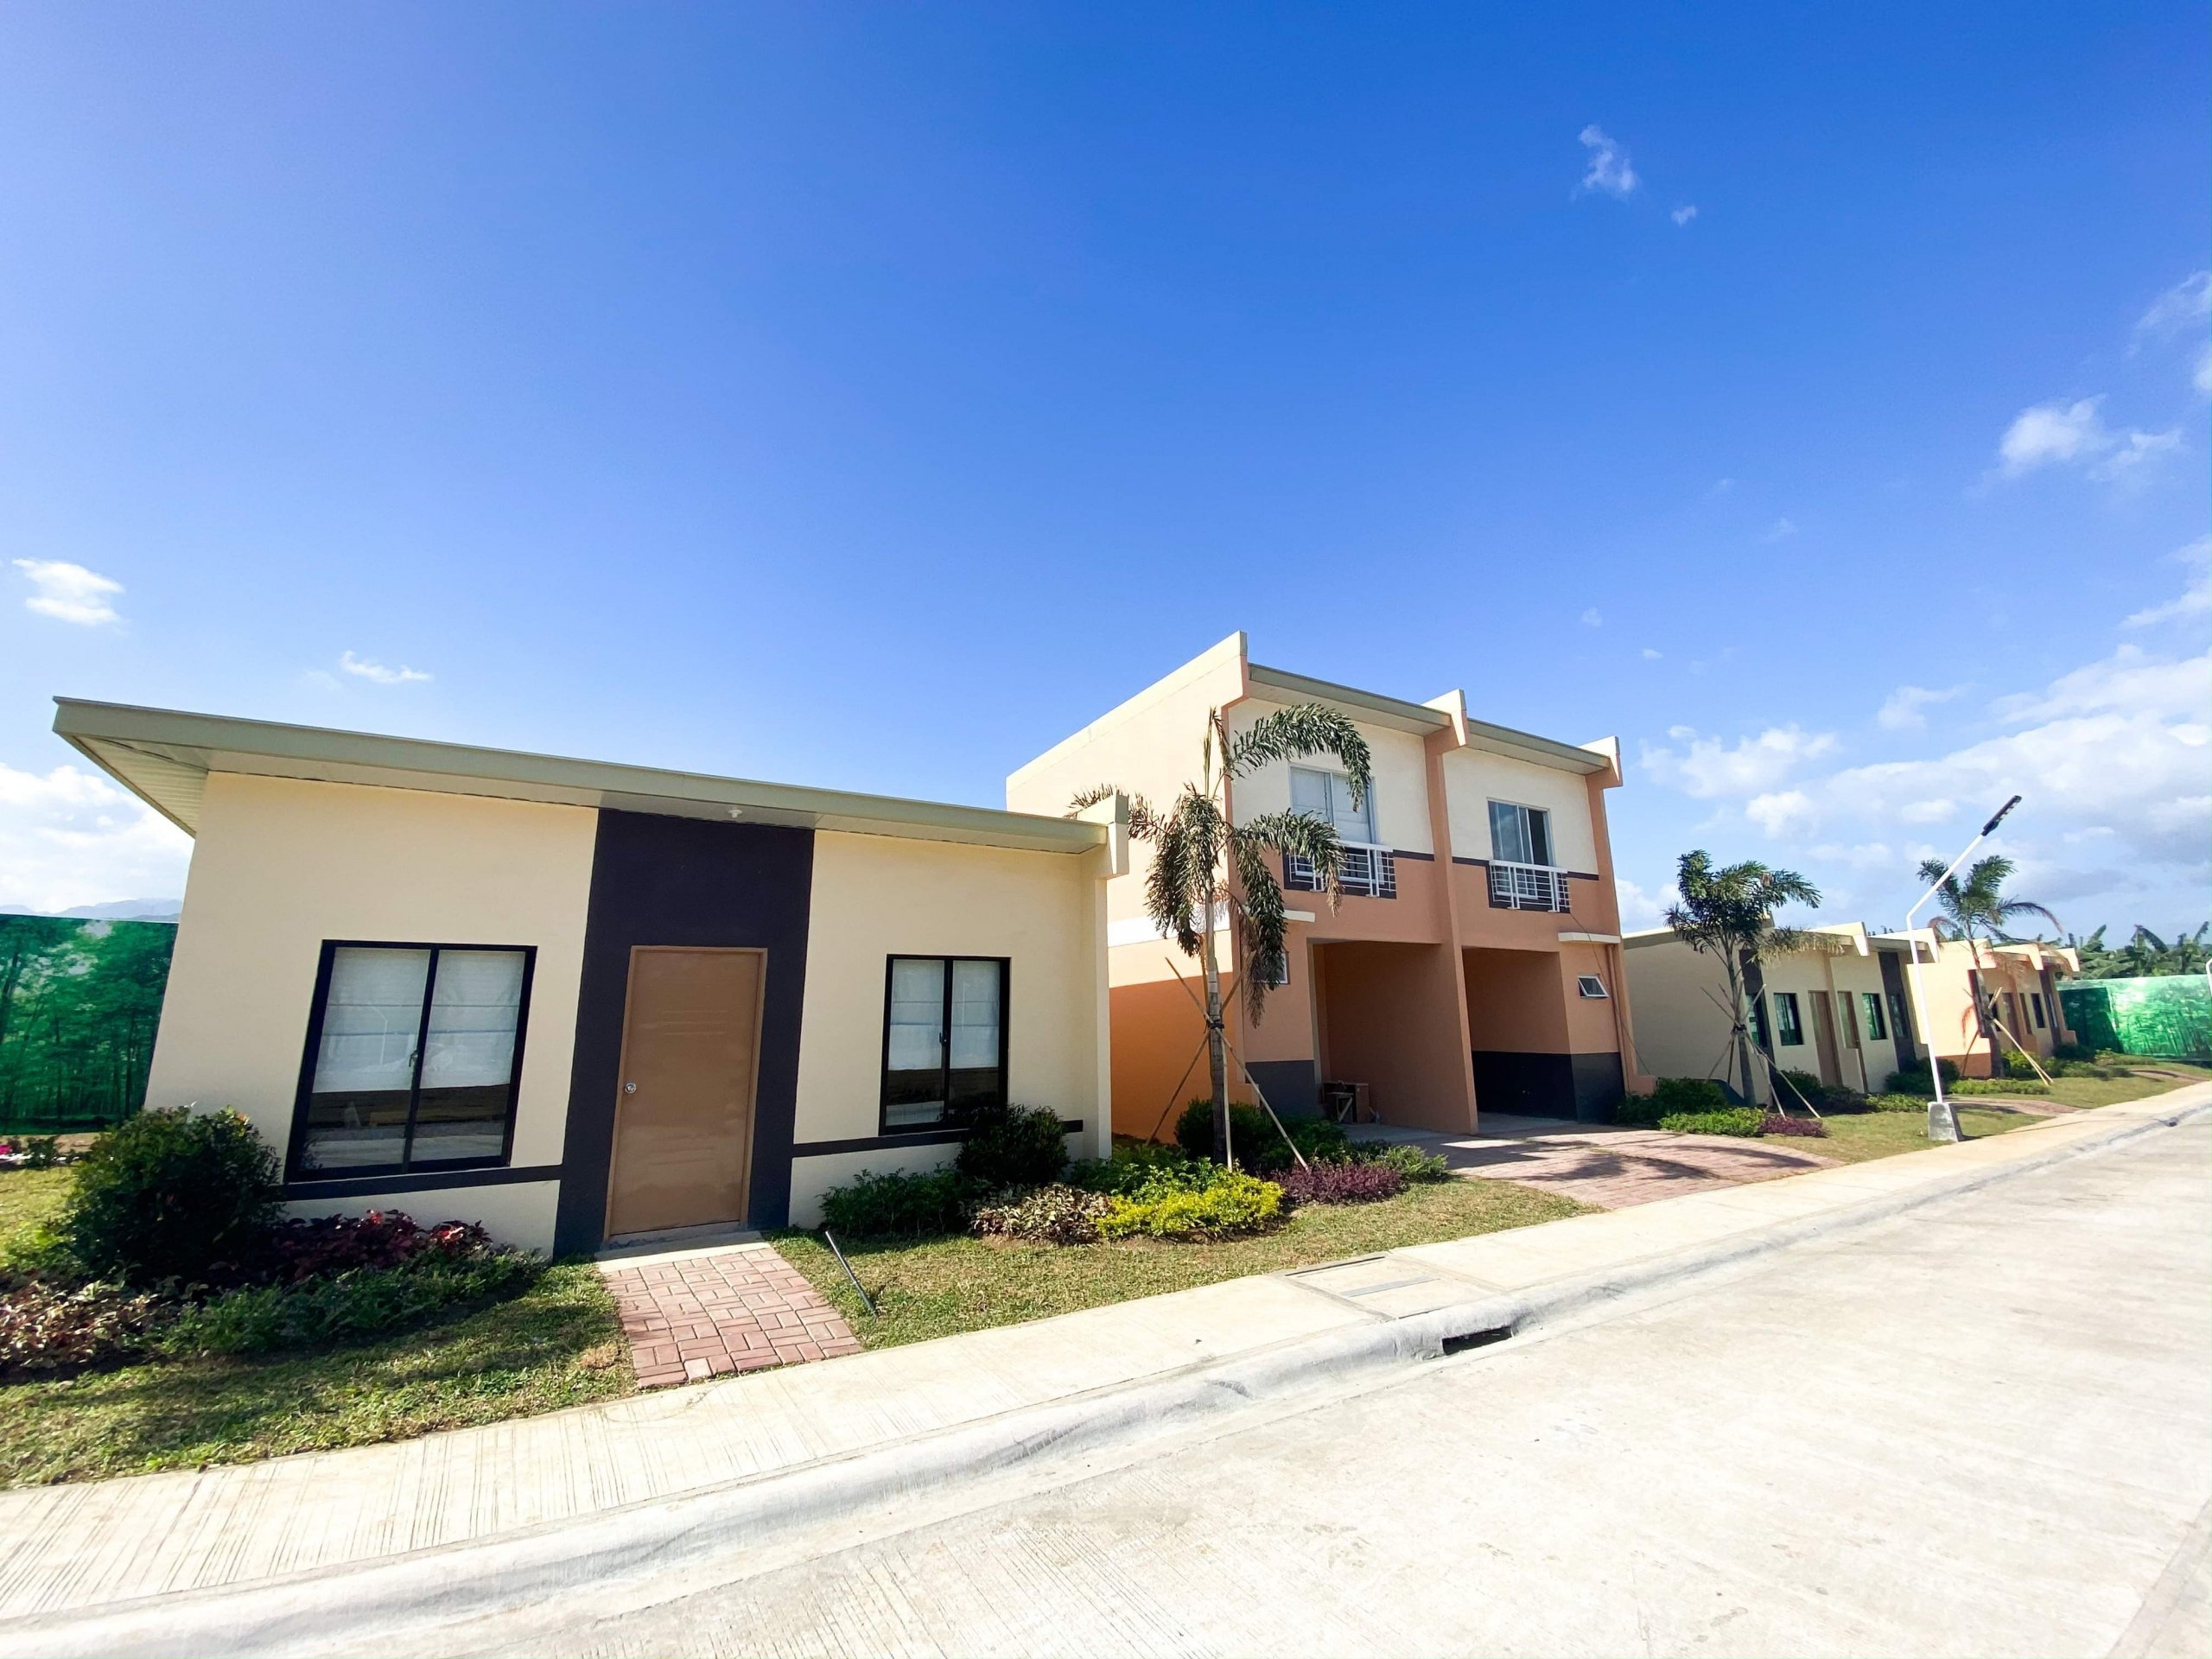 Calamba continues to be a worthy property investment